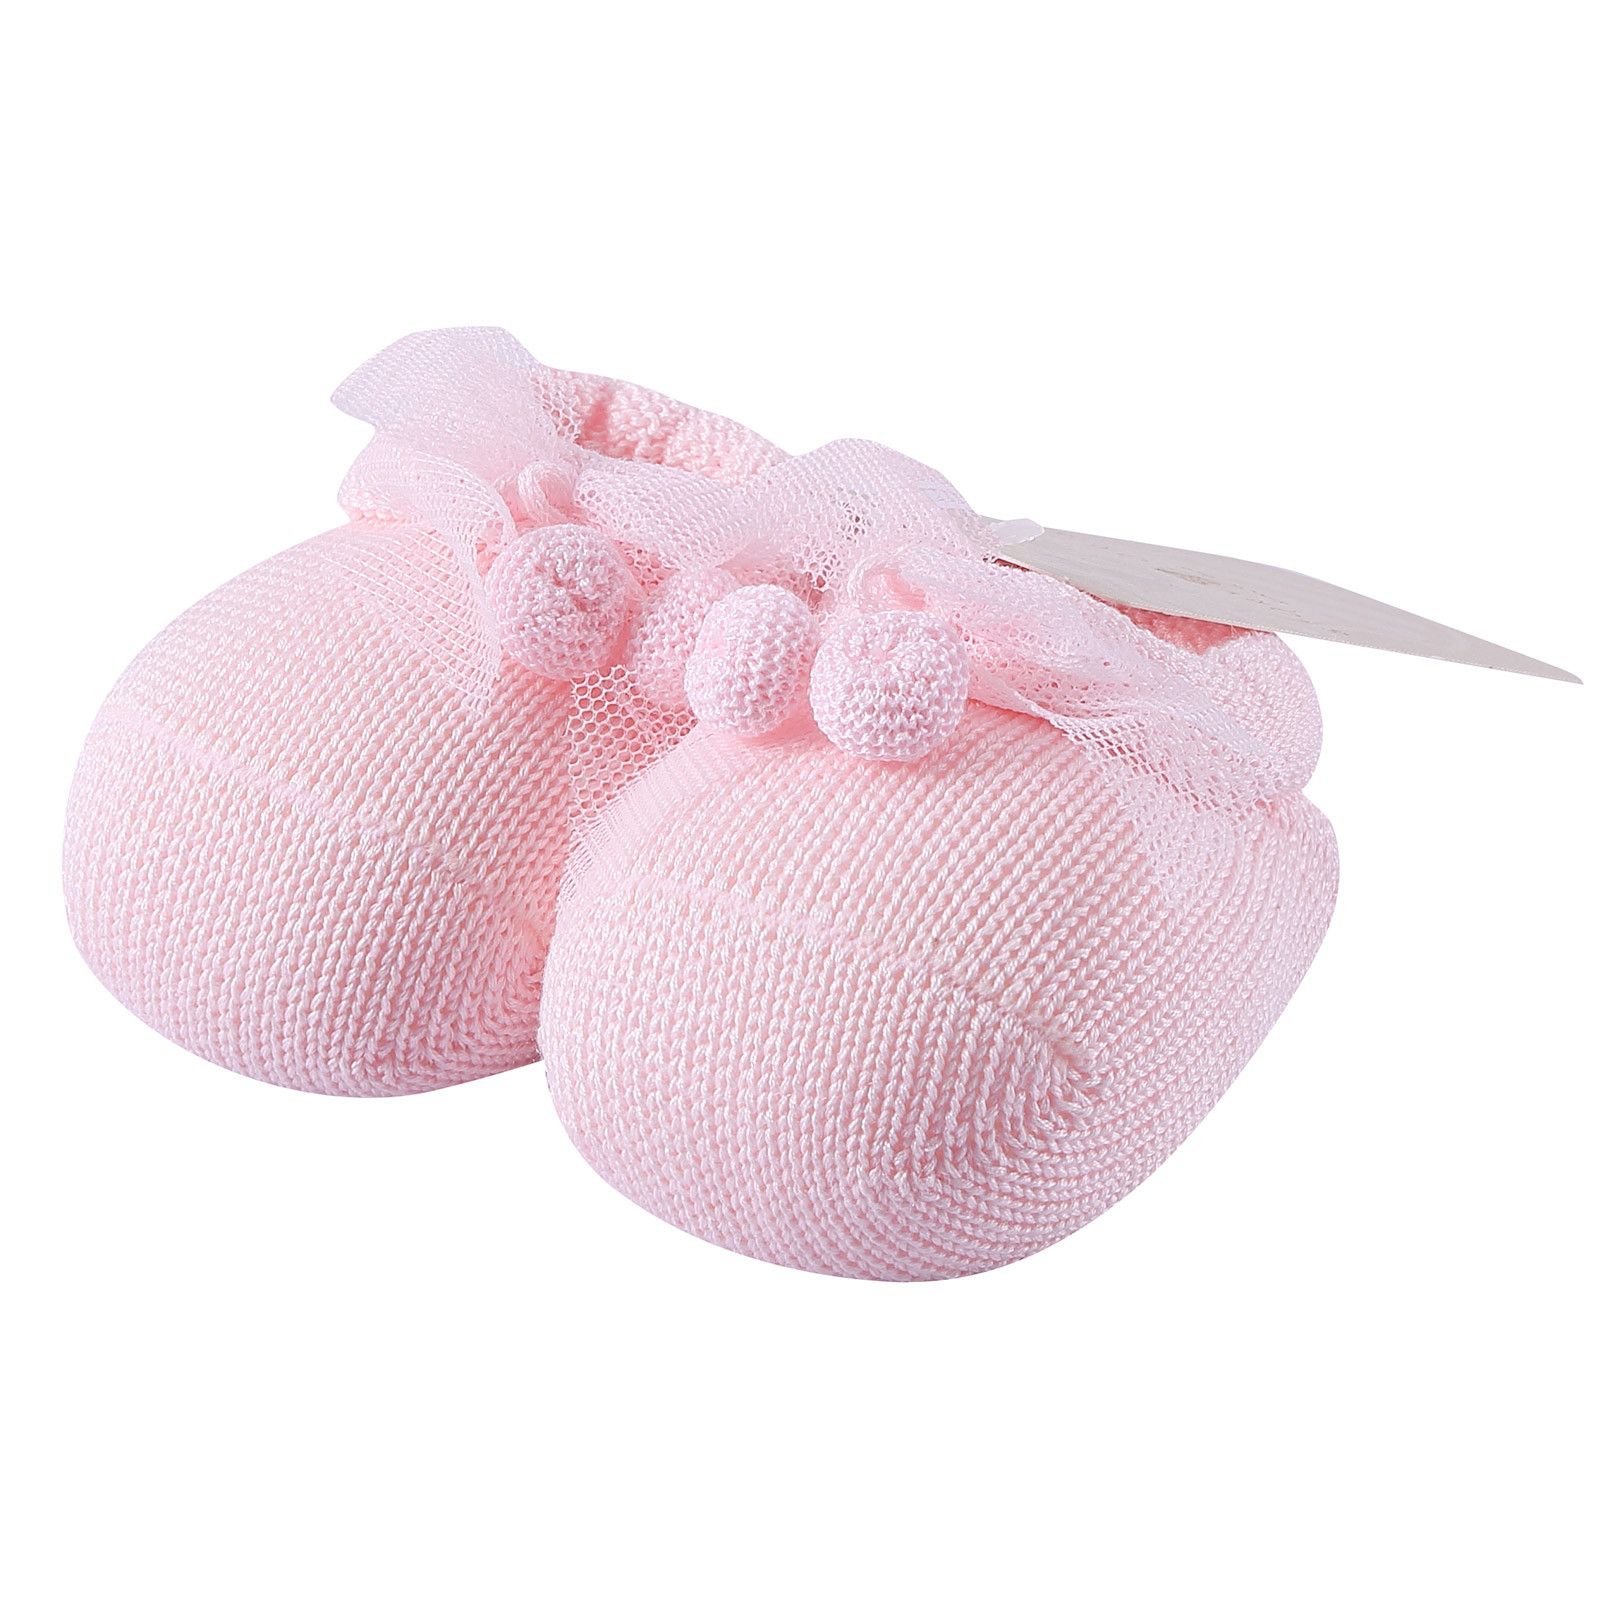 Baby Pink Knitted Cotton Shoes&Hair Band Gift Set - CÉMAROSE | Children's Fashion Store - 2